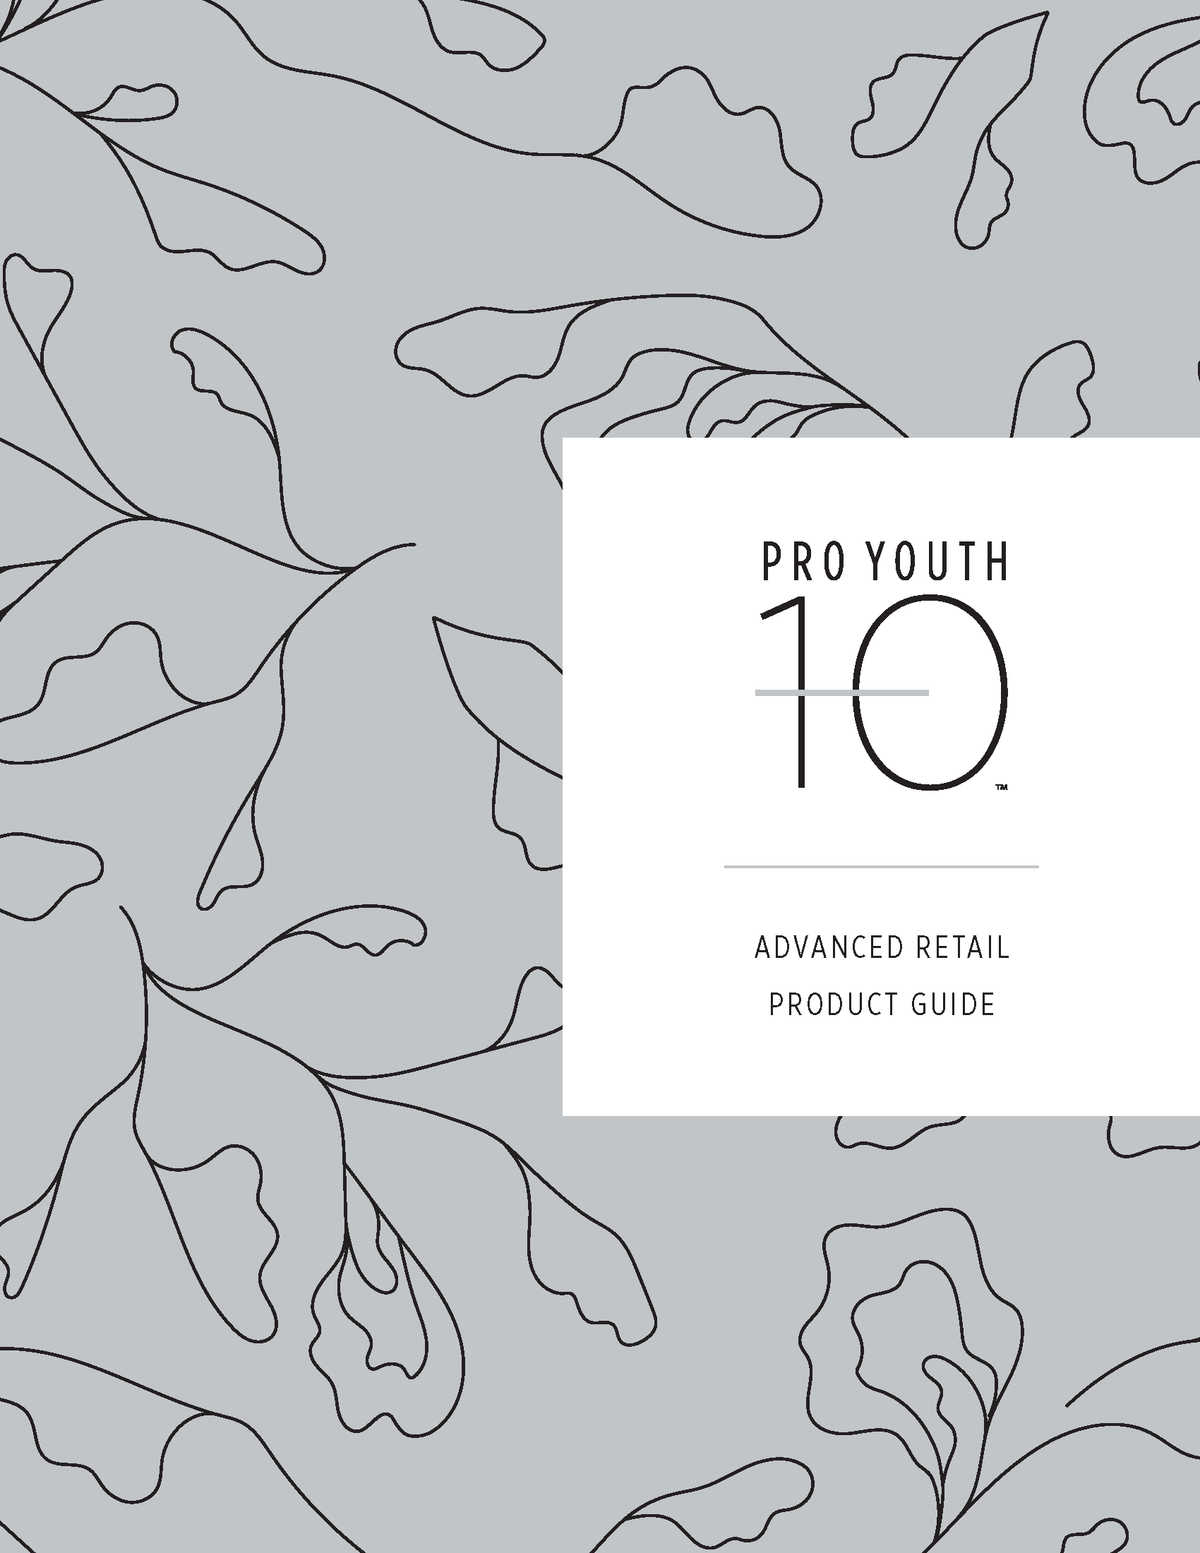 Pro Youth MT - Advanced Retail Product Guide